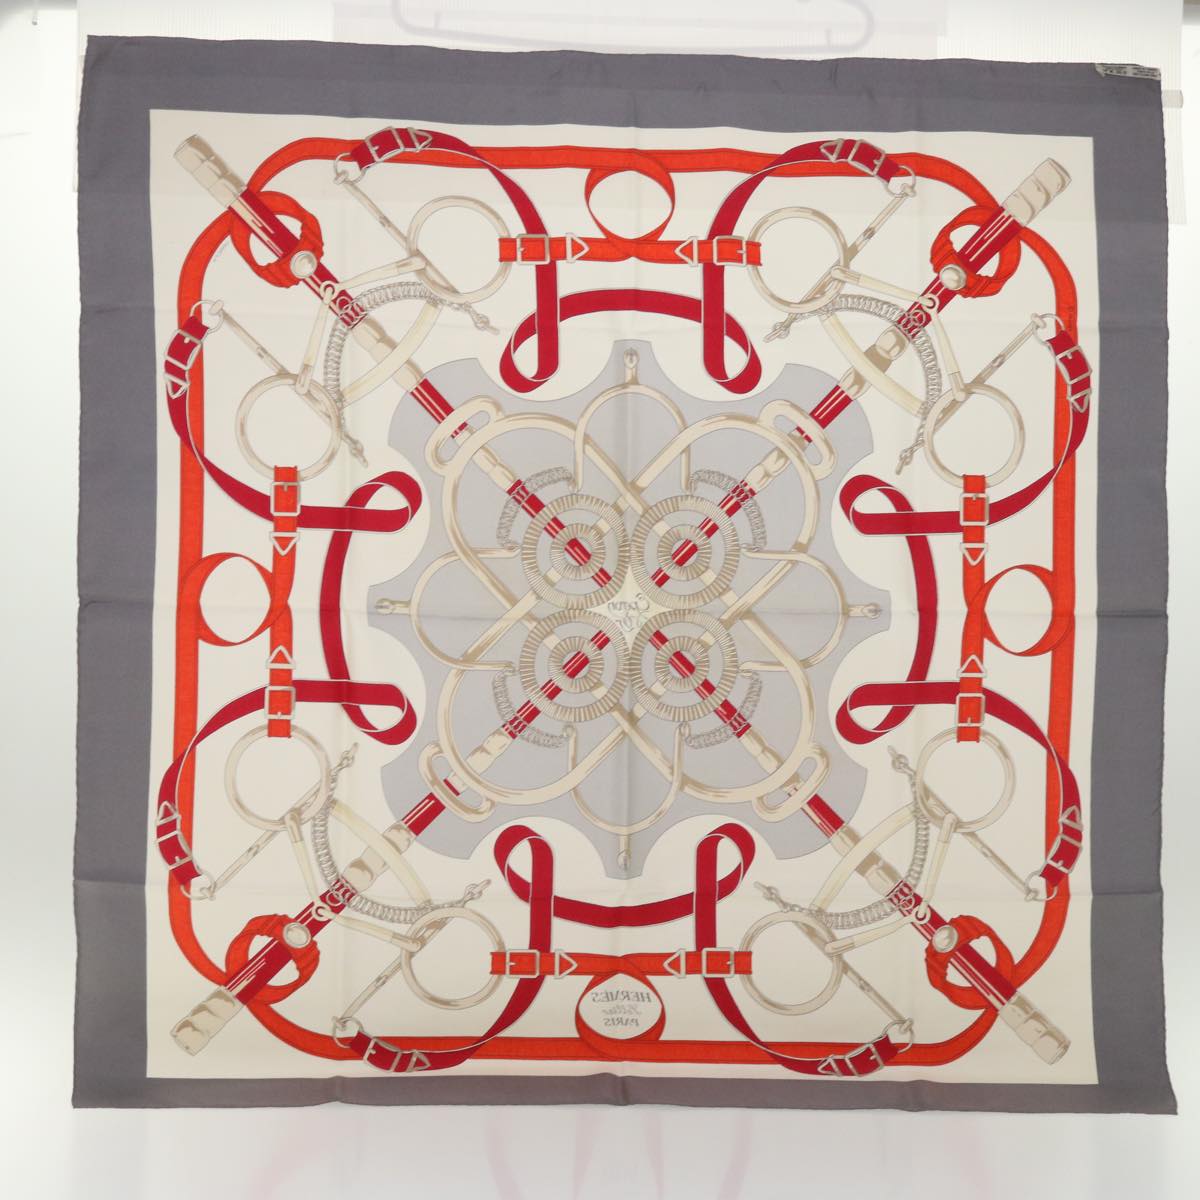 HERMES Carre 90 Eperon d'or Scarf Silk White Red gray Auth bs7315